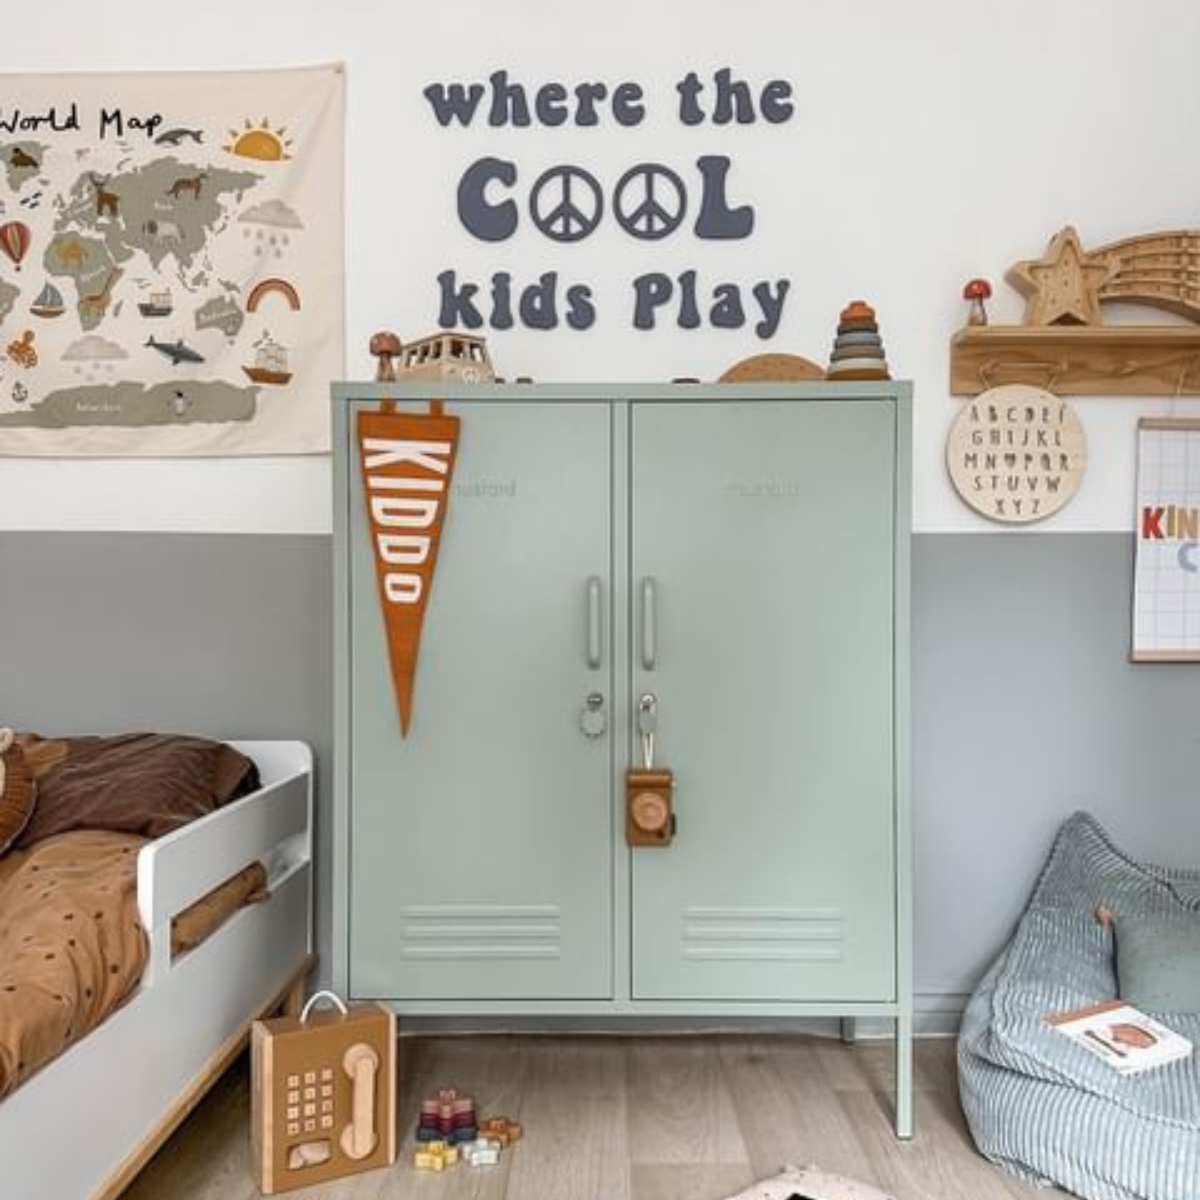 A Sage Midi sits in a child's room underneath lettering that reads 'where the cool kids play.' There is a fabric world map on the wall and soft furnishings in neutral earthy shades.